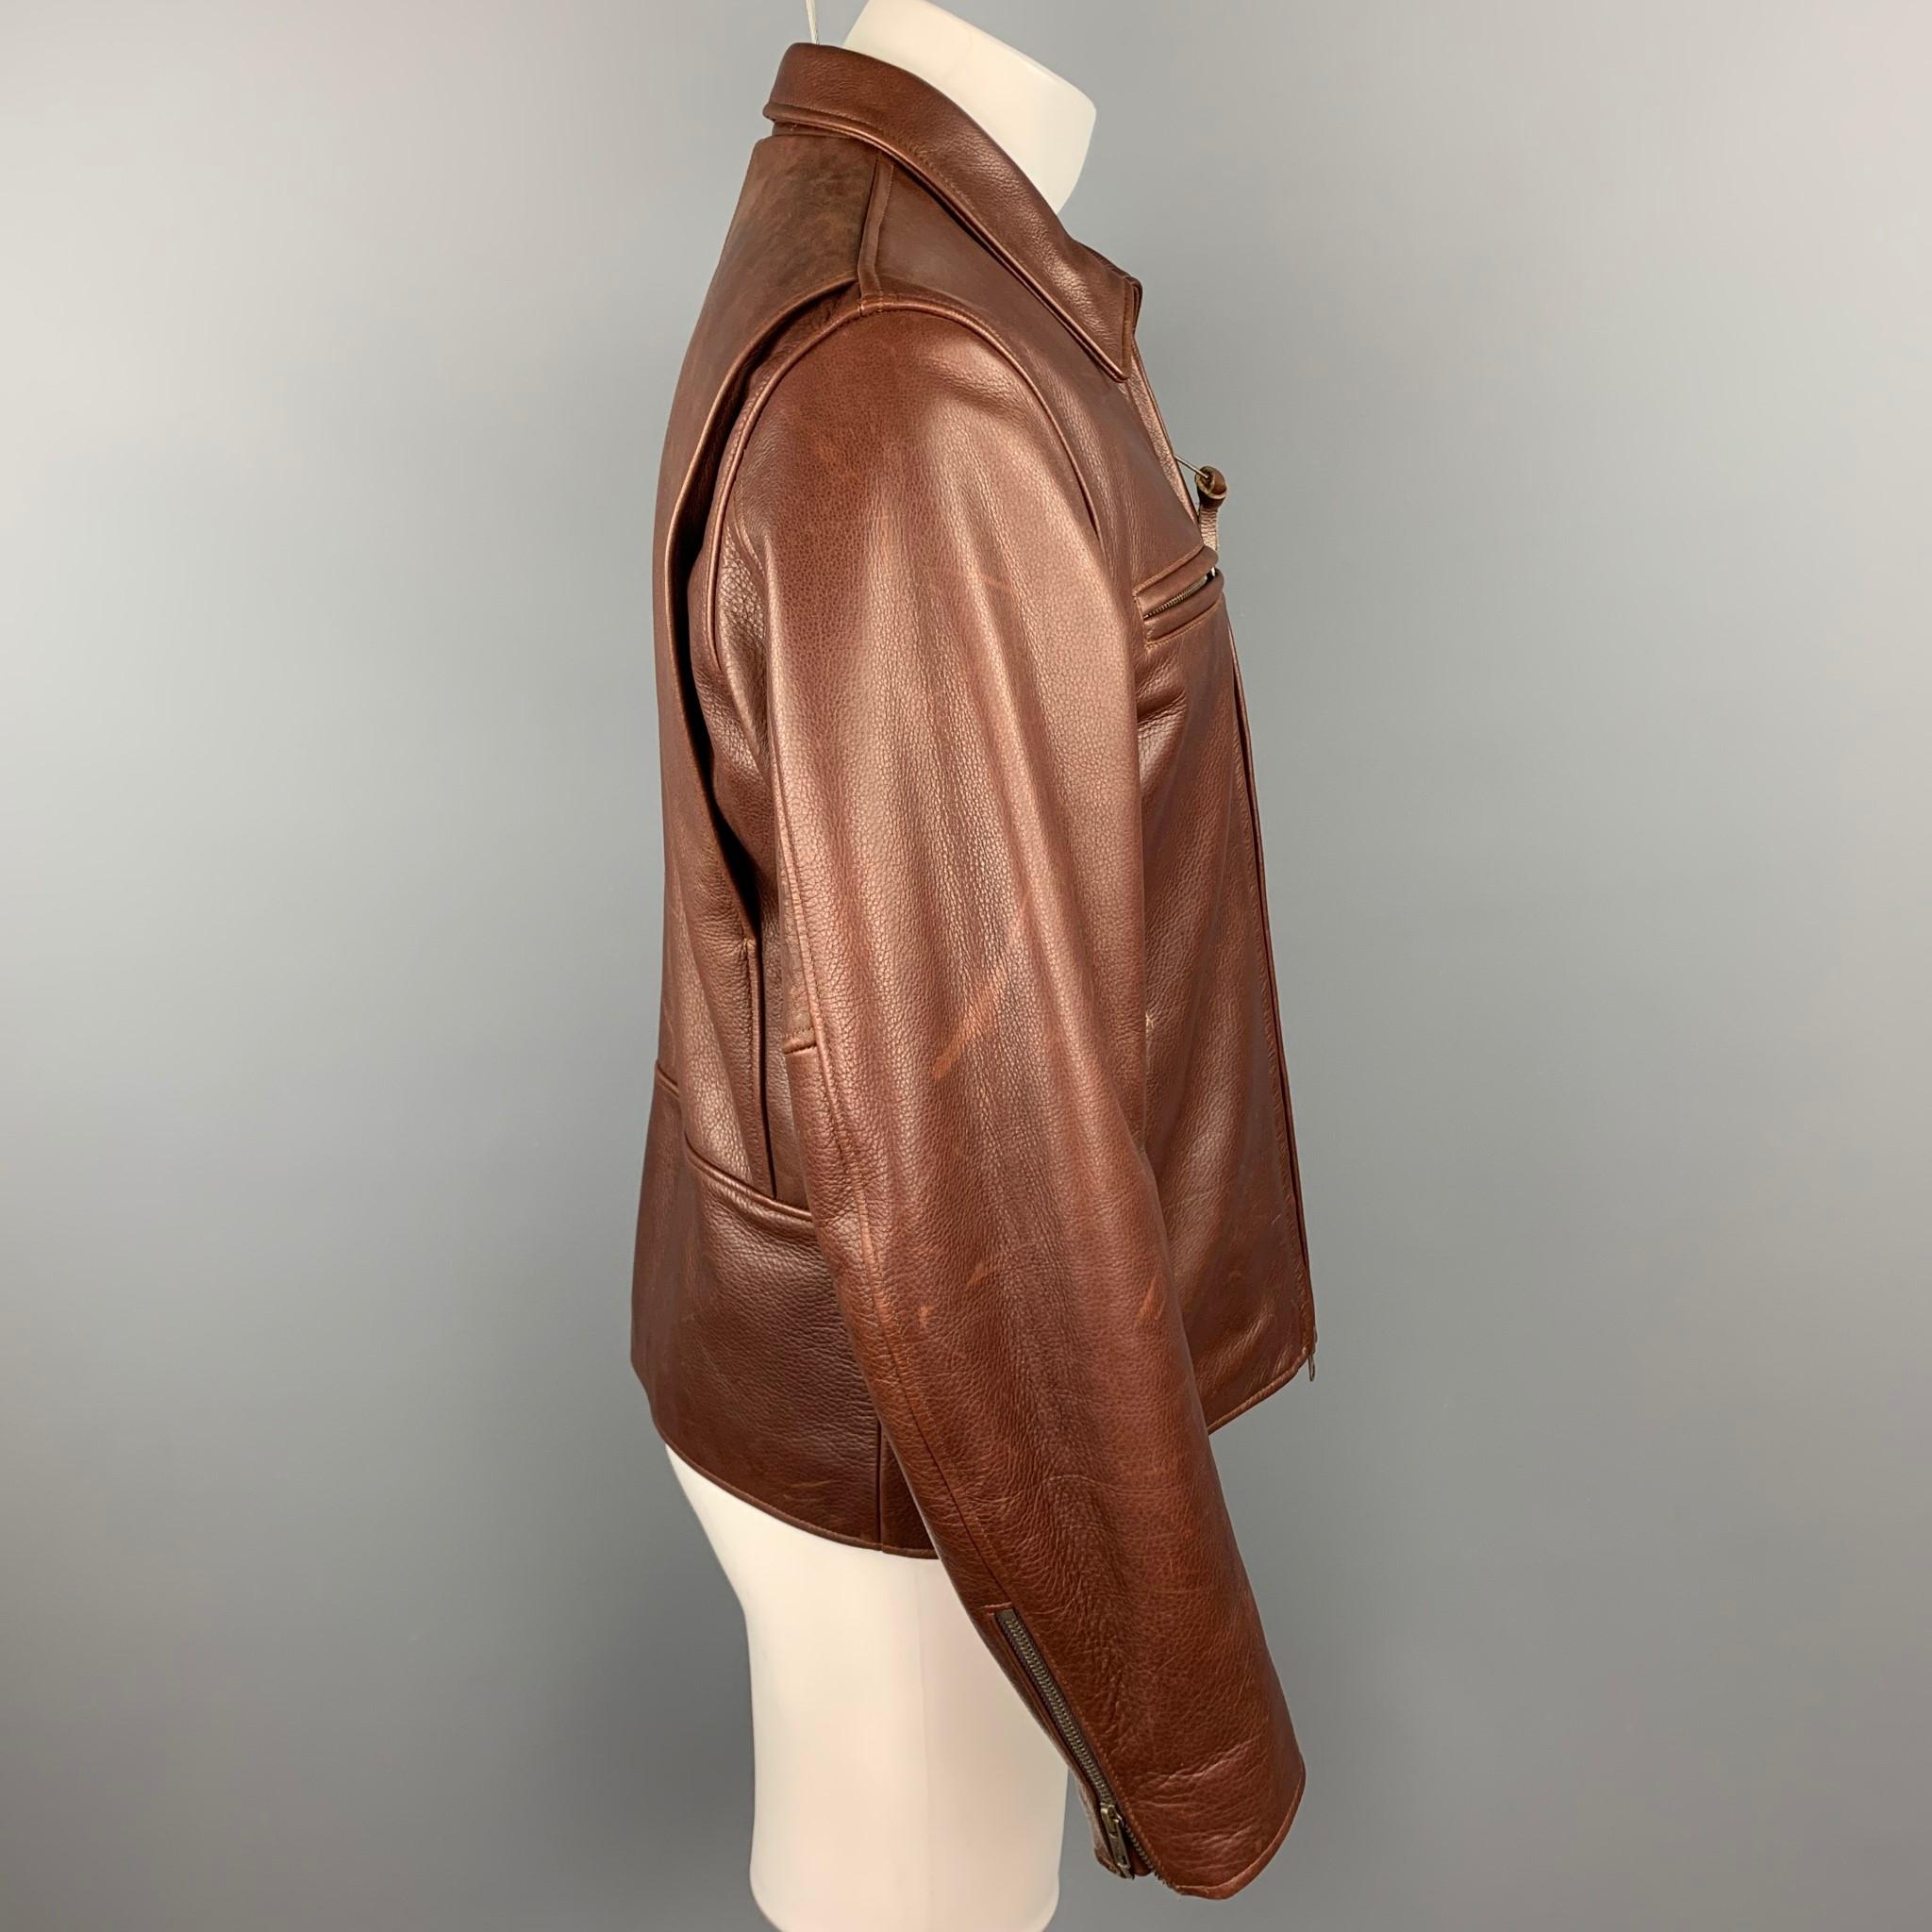 GOLDEN BEAR or TAYLOR STITCH jacket comes in a brown leather with a full liner featuring zipper sleeves, front slit pockets, spread collar, and a zip up closure. Made in USA.

Very Good Pre-Owned Condition.
Marked: L

Measurements:

Shoulder: 17.5